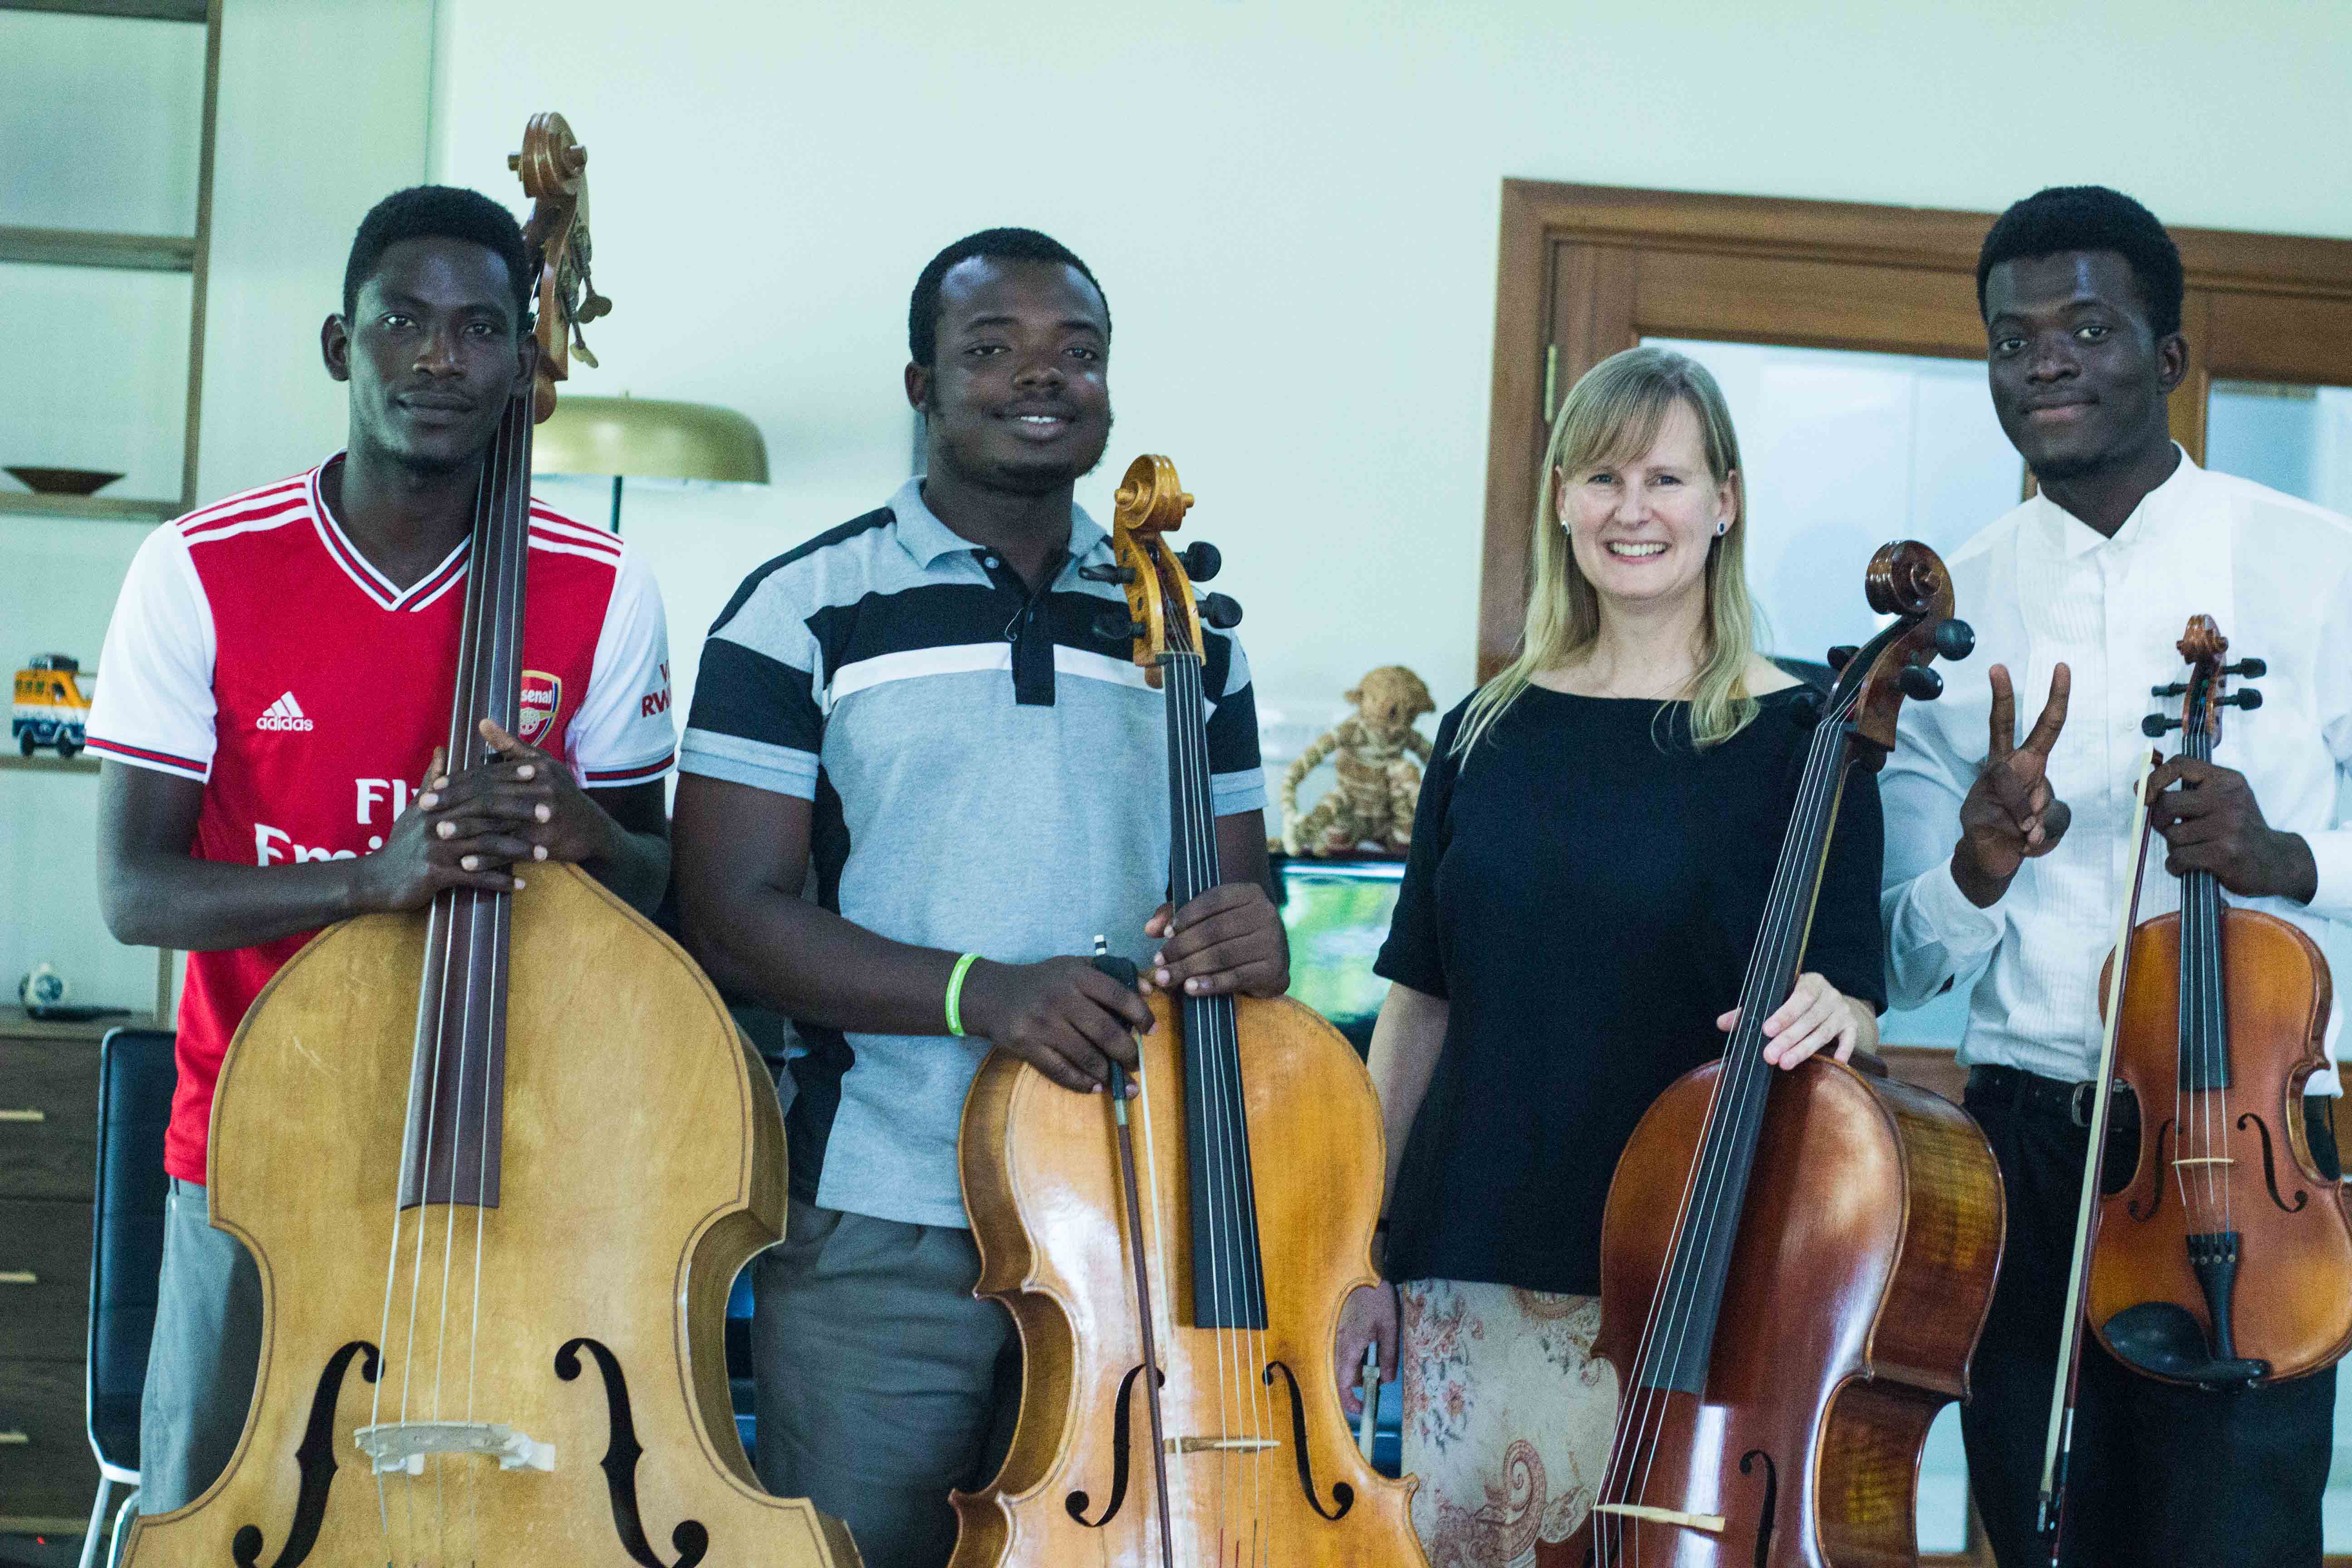 Sally Singer Tuttle: A Fascination with Ghanaian Art Music Jesse Johnson interviews Sally Singer Tuttle, an American cellist whose love affair with Ghanaian music brought her to Accra in September 2019 to help grow Ghanaian musicians